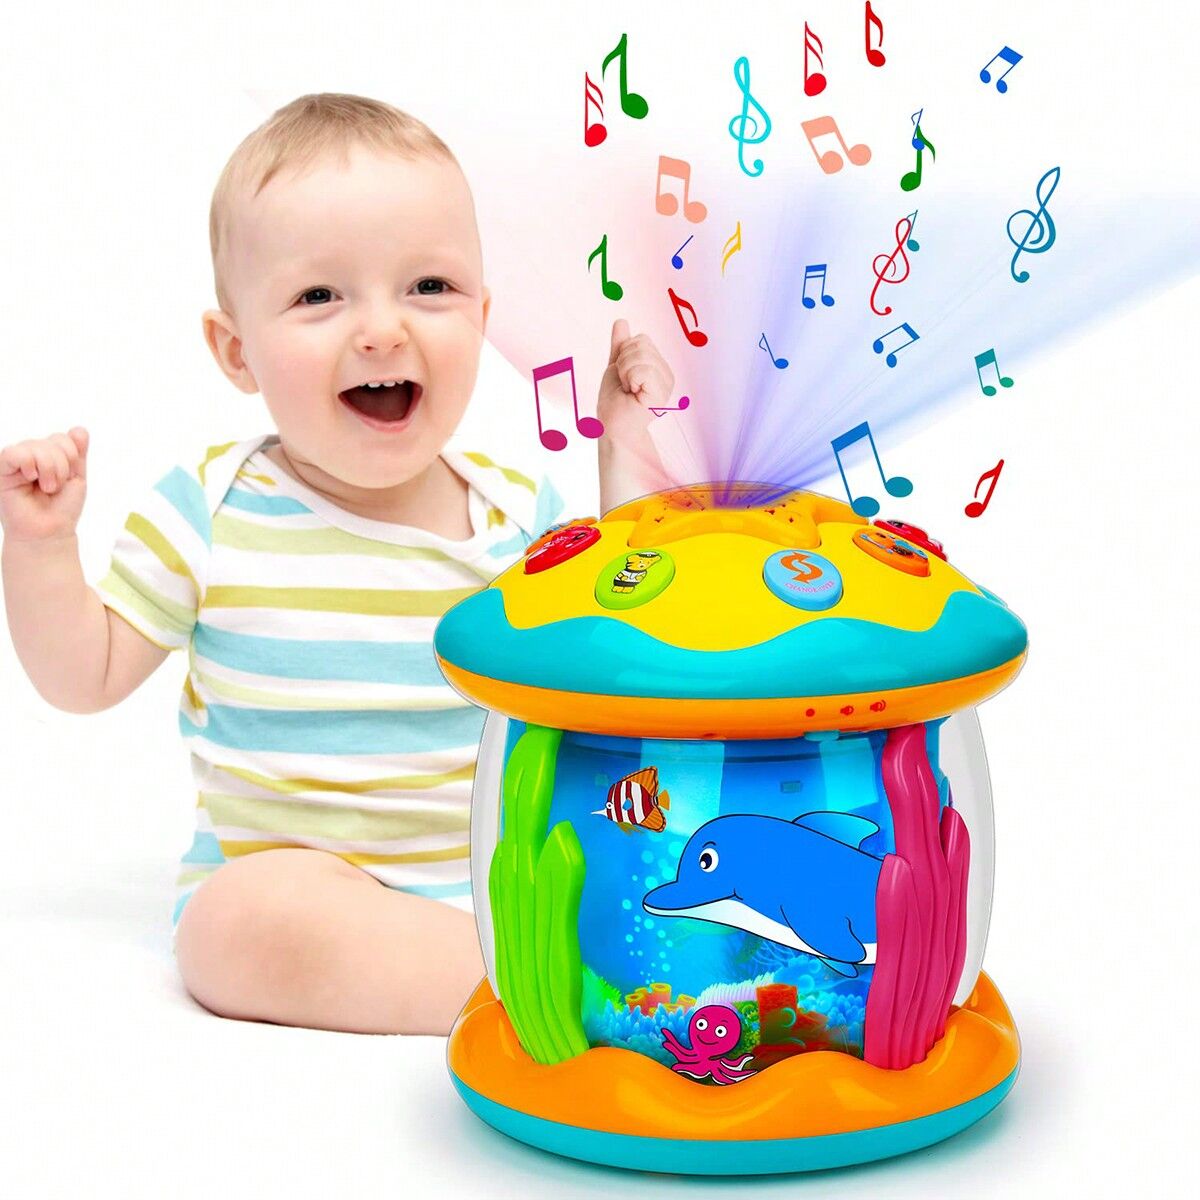 SHEIN Baby Toy 4-in-1 Music Projection Ocean Rotating Time Crawling Light Toy, Suitable For 0-3, 3-6, 6-12 Months Baby Gift (color Random) Multicolor one-size